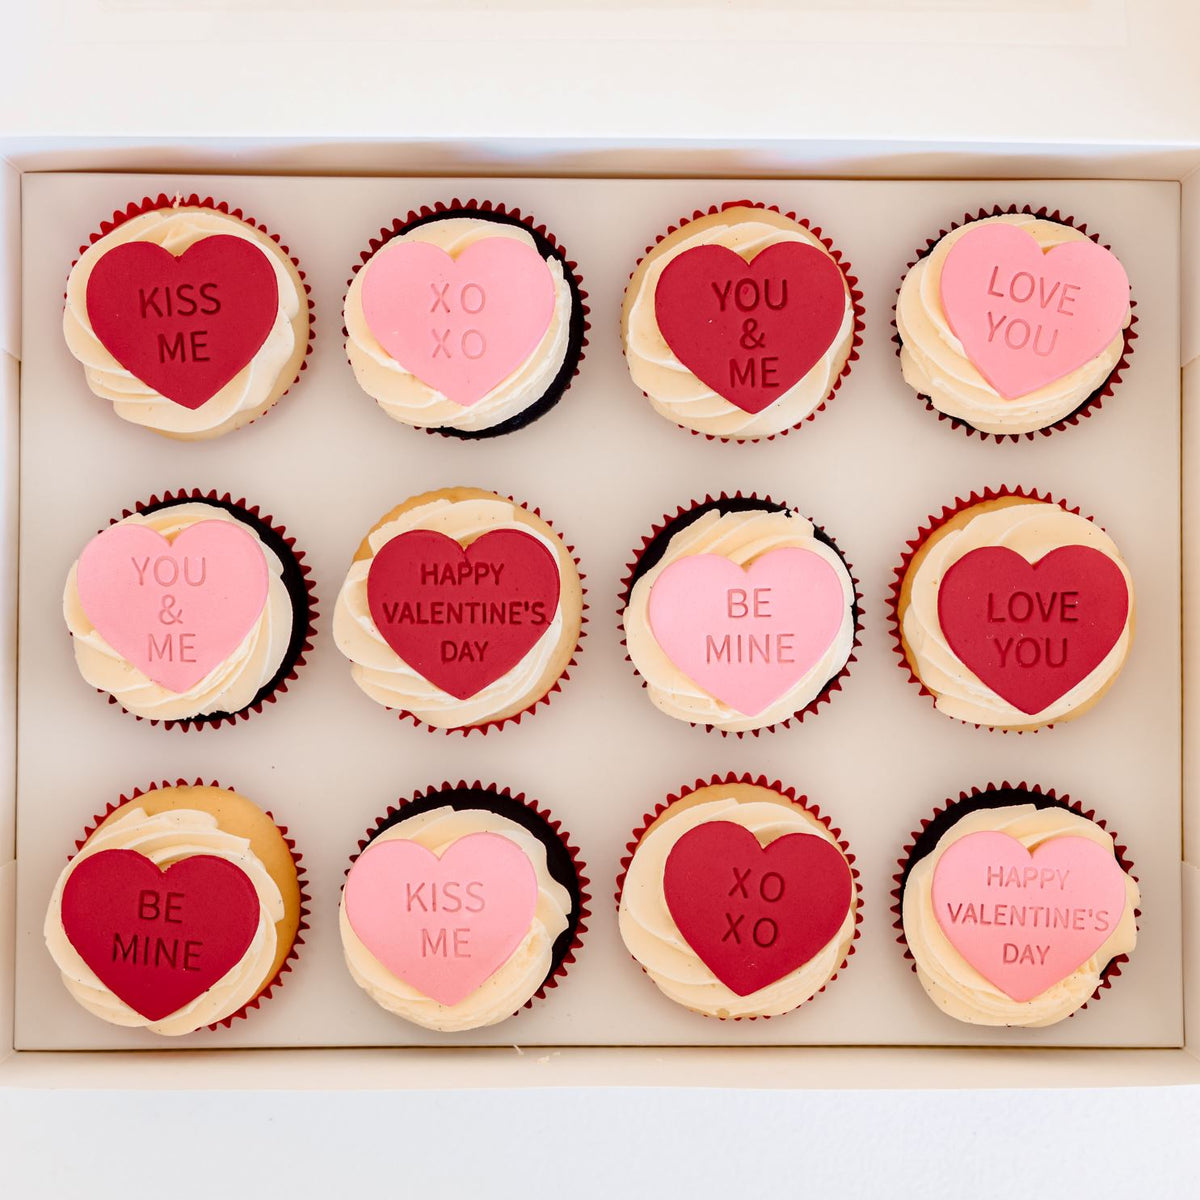 Be Mine Giftbox The Cupcake Queens 